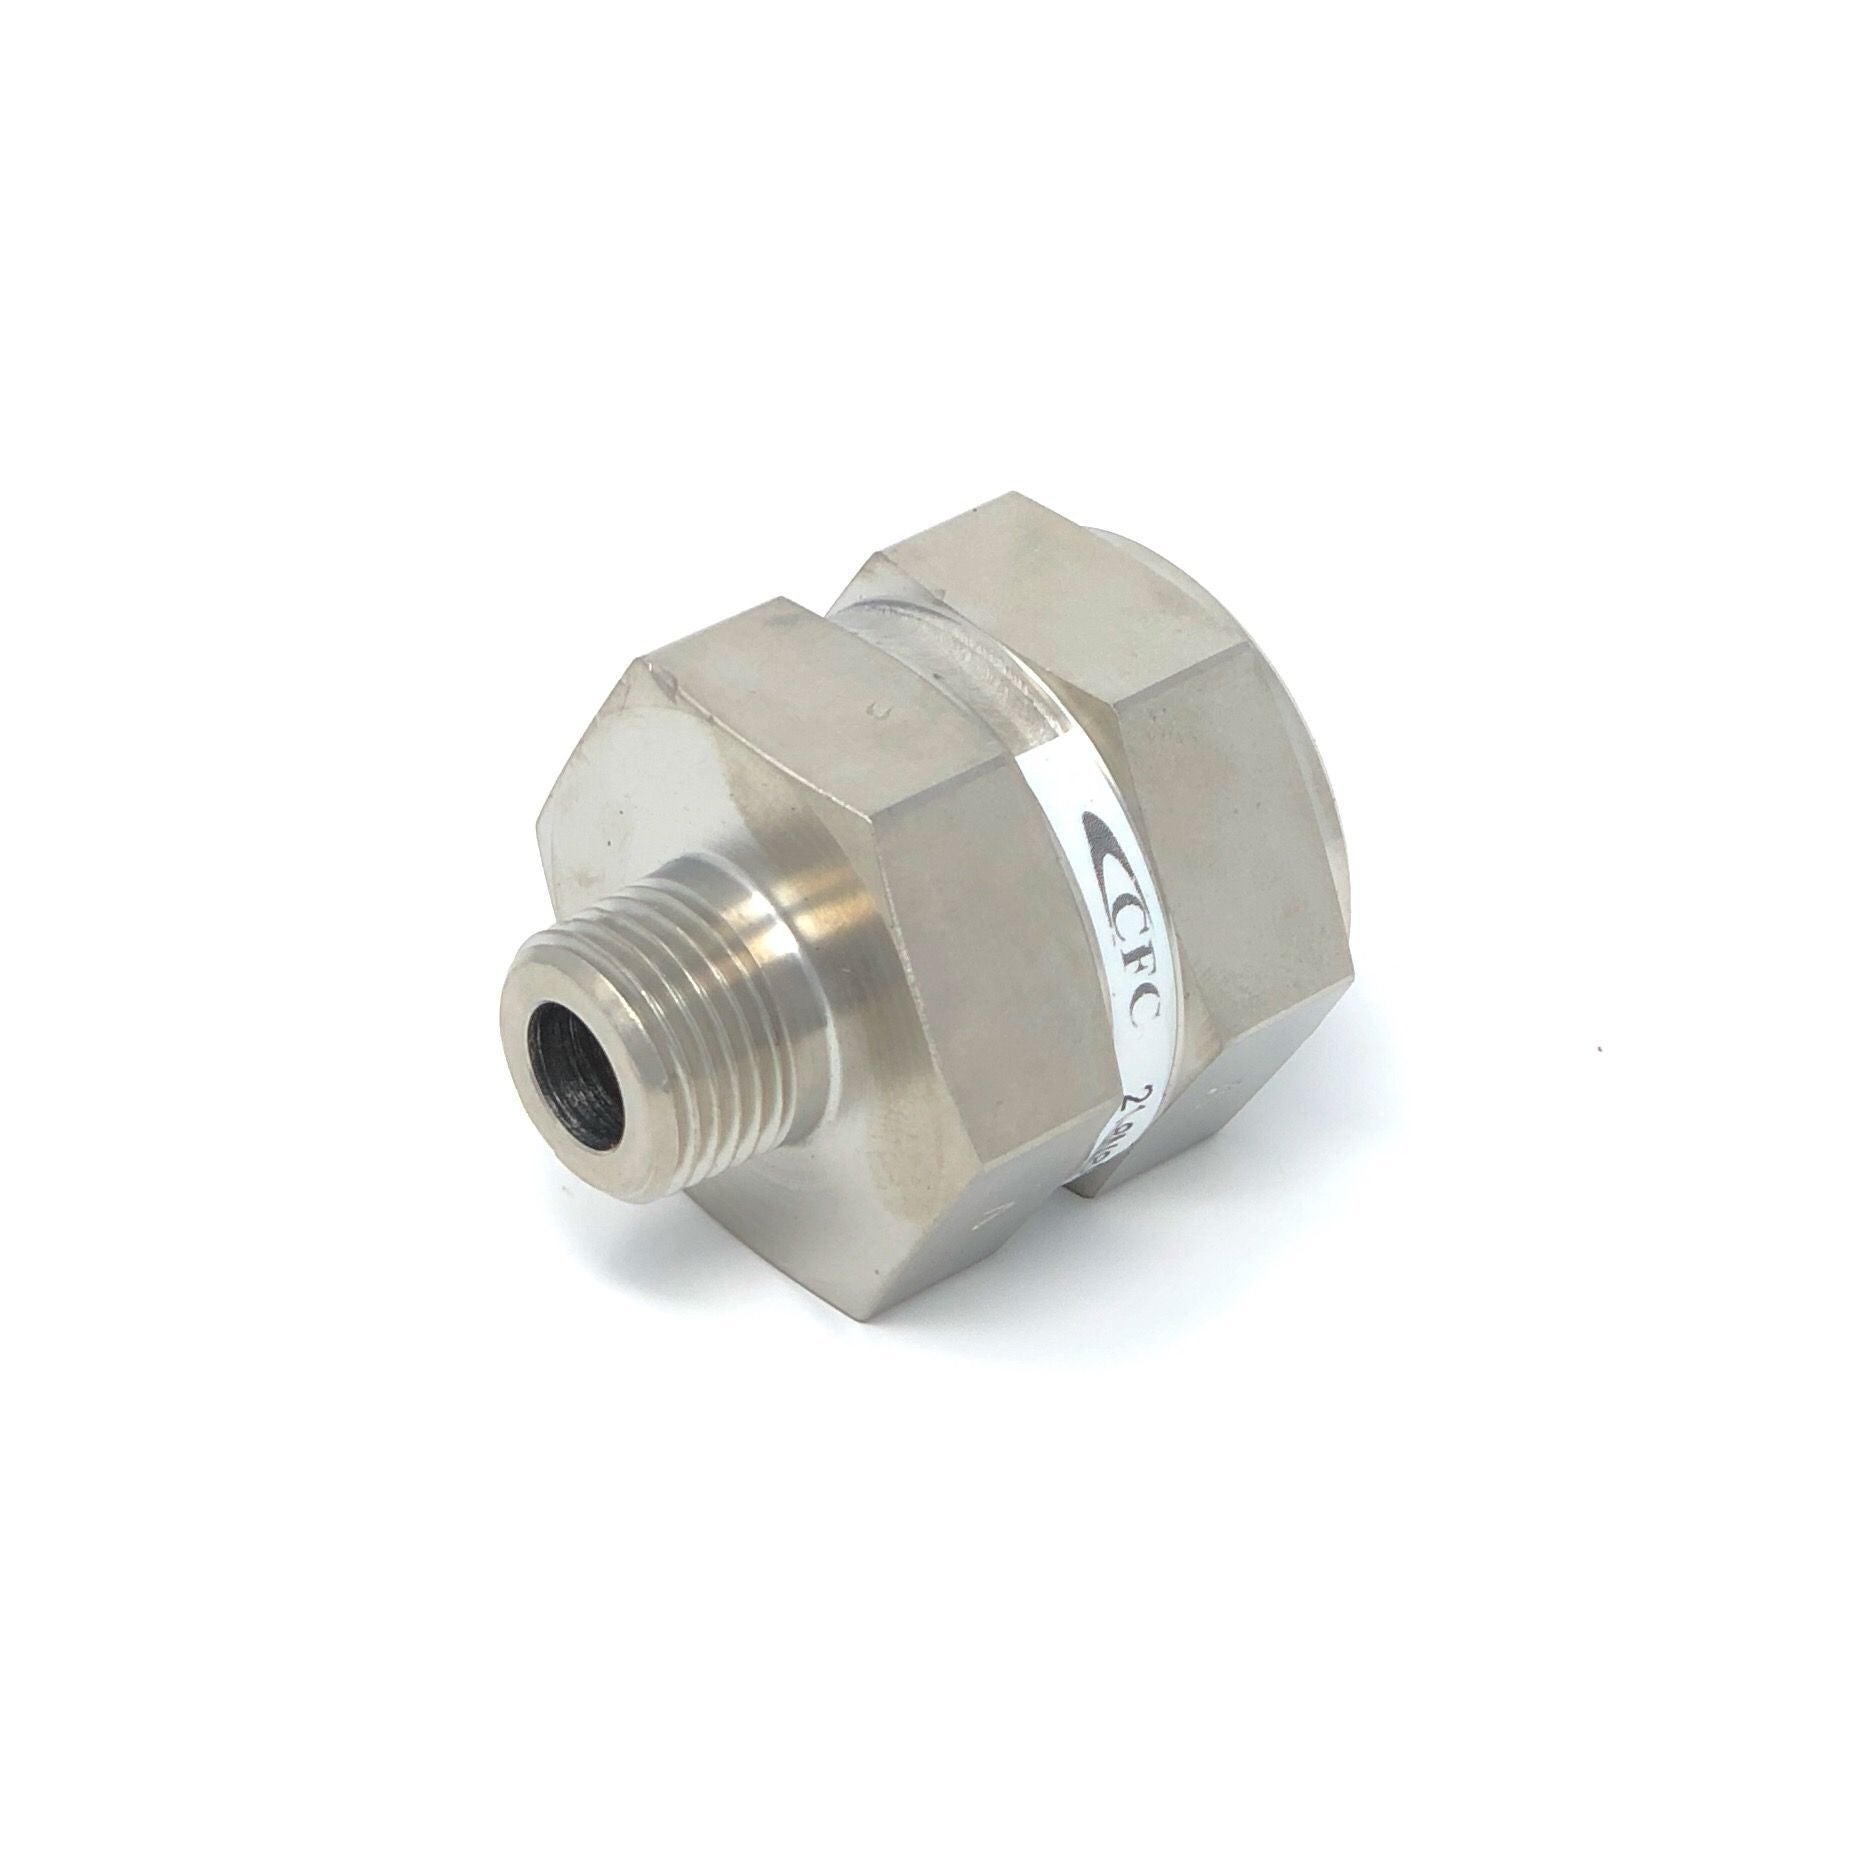 21-6S6S-100S : Chase High Pressure Inline Filter, 6000psi, #6 SAE (3/8") , 100 Micron, No Visual Indicator, No Bypass